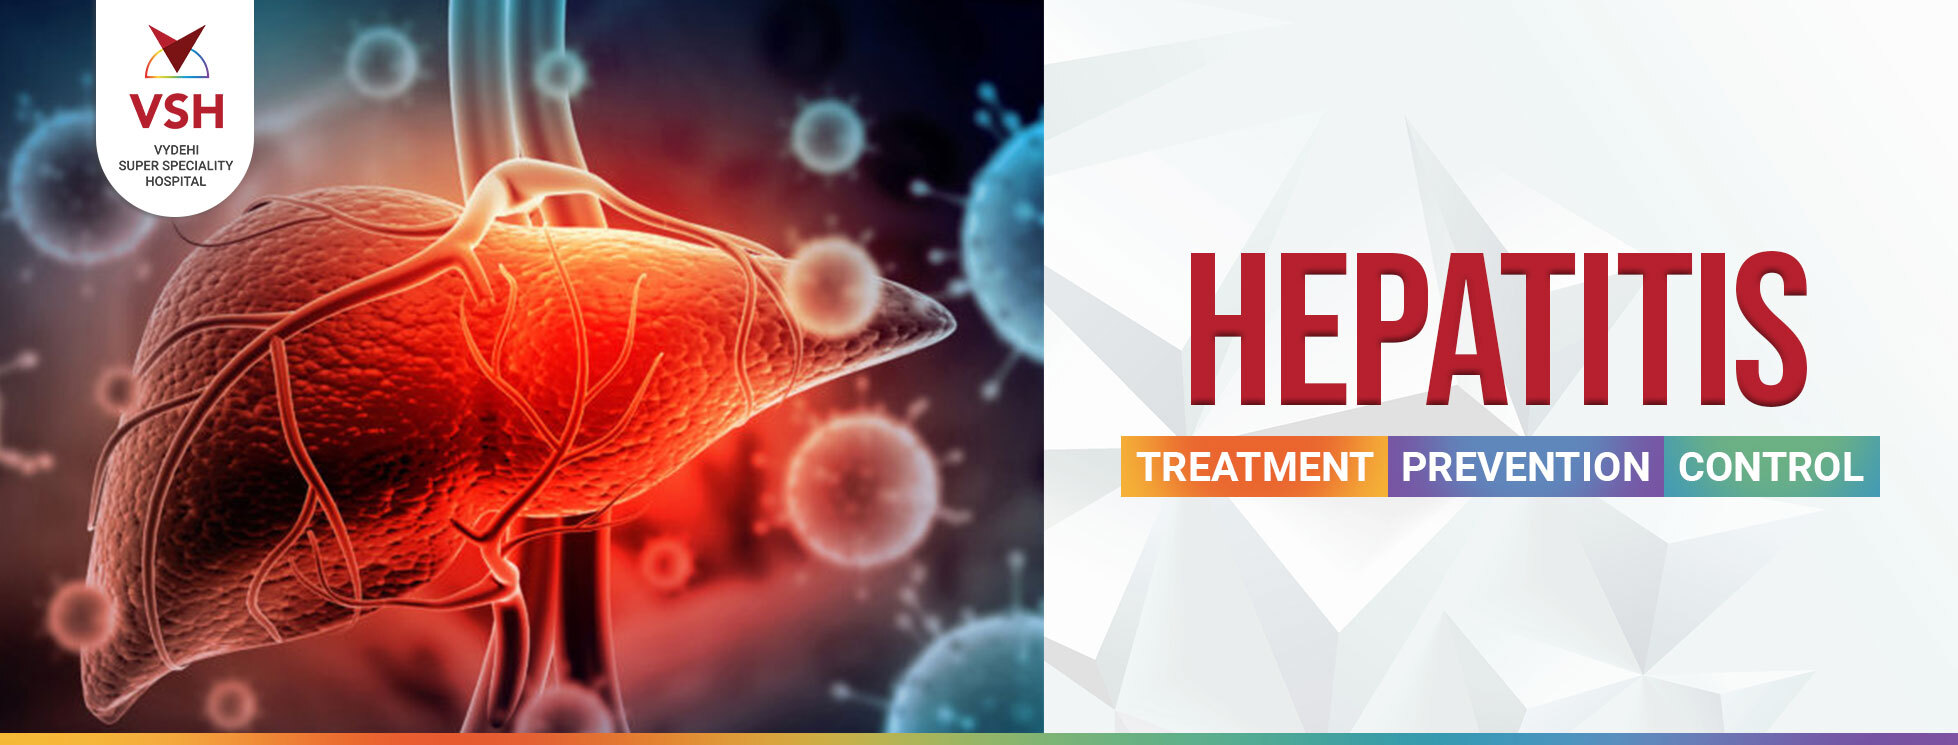 Hepatitis – Treatment, Prevention, and Control